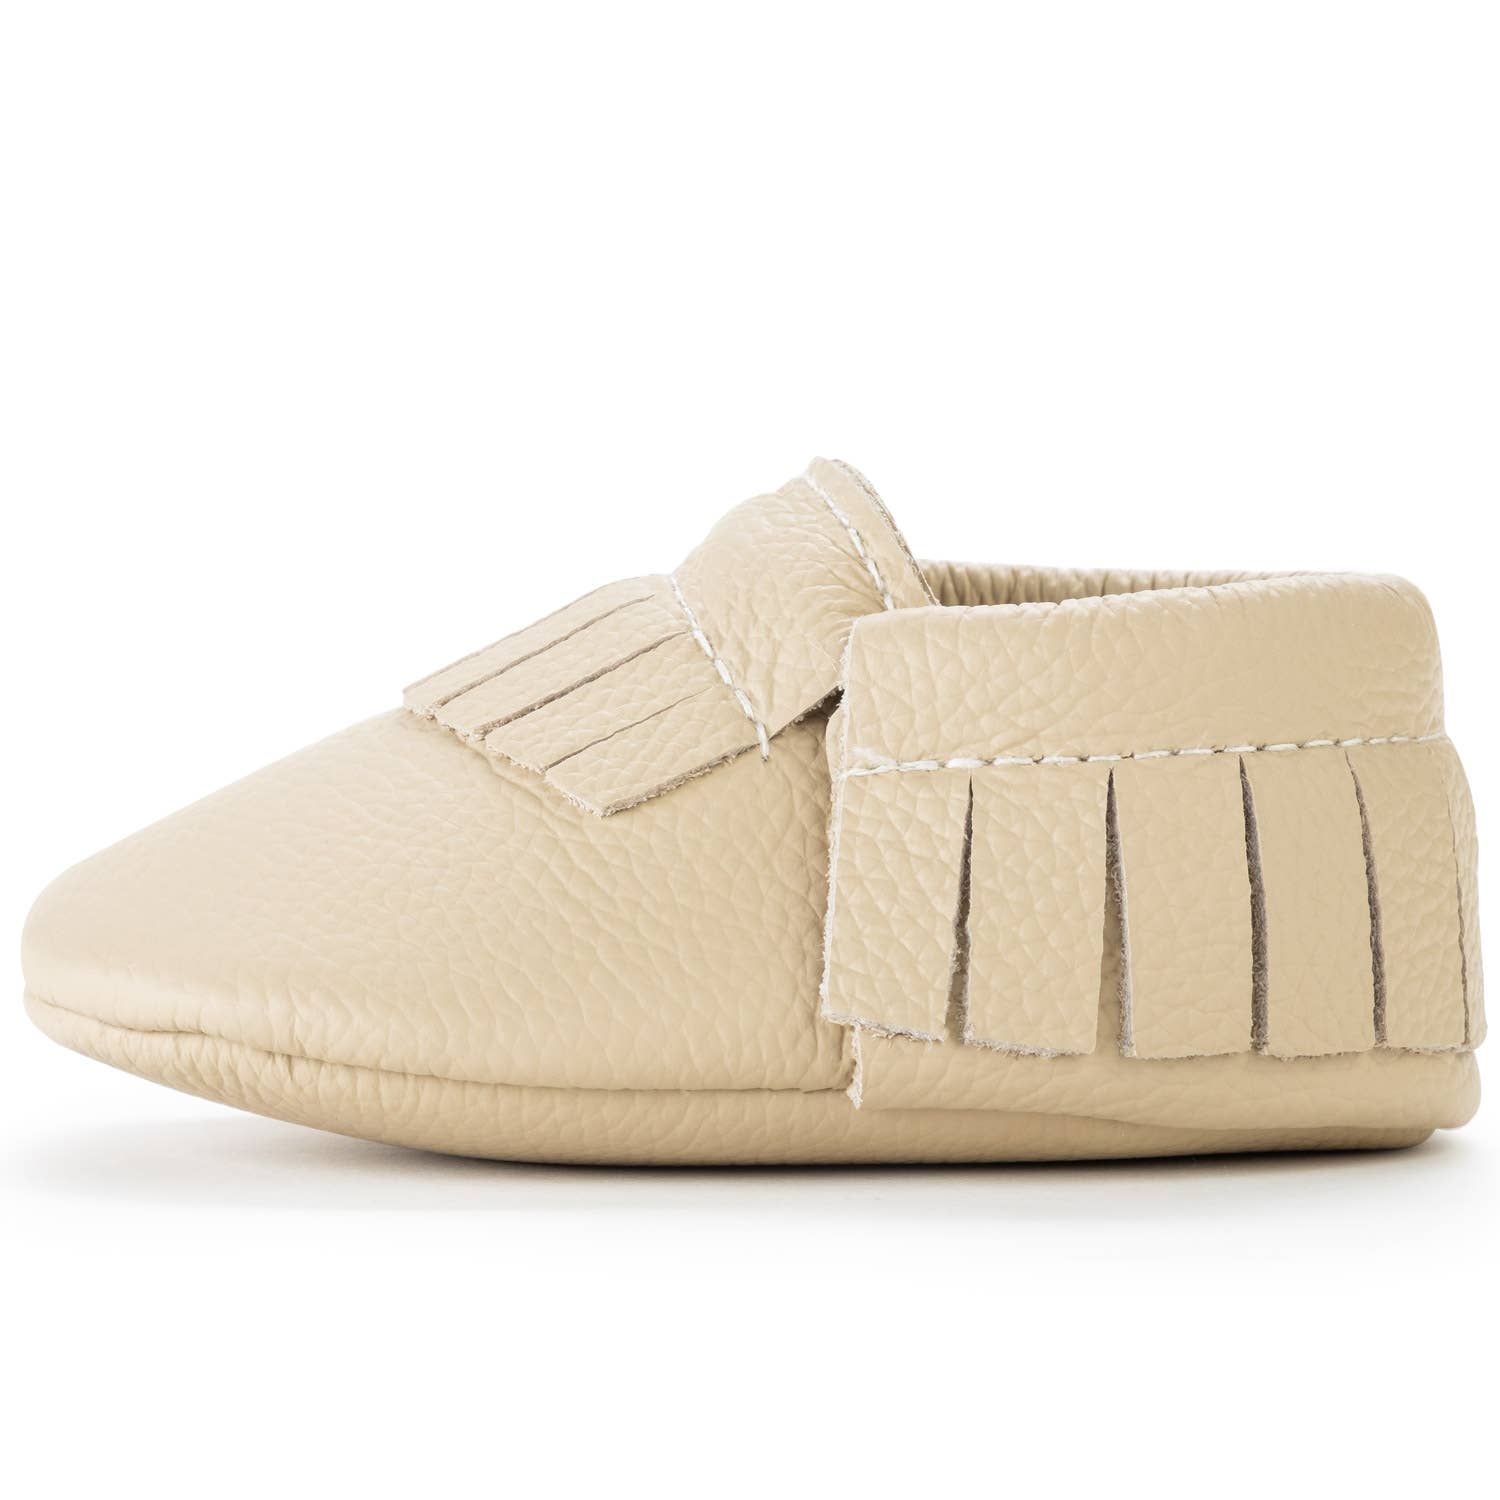 Baby Moccasins - Latte Neutral - Baby Toddler Shoes